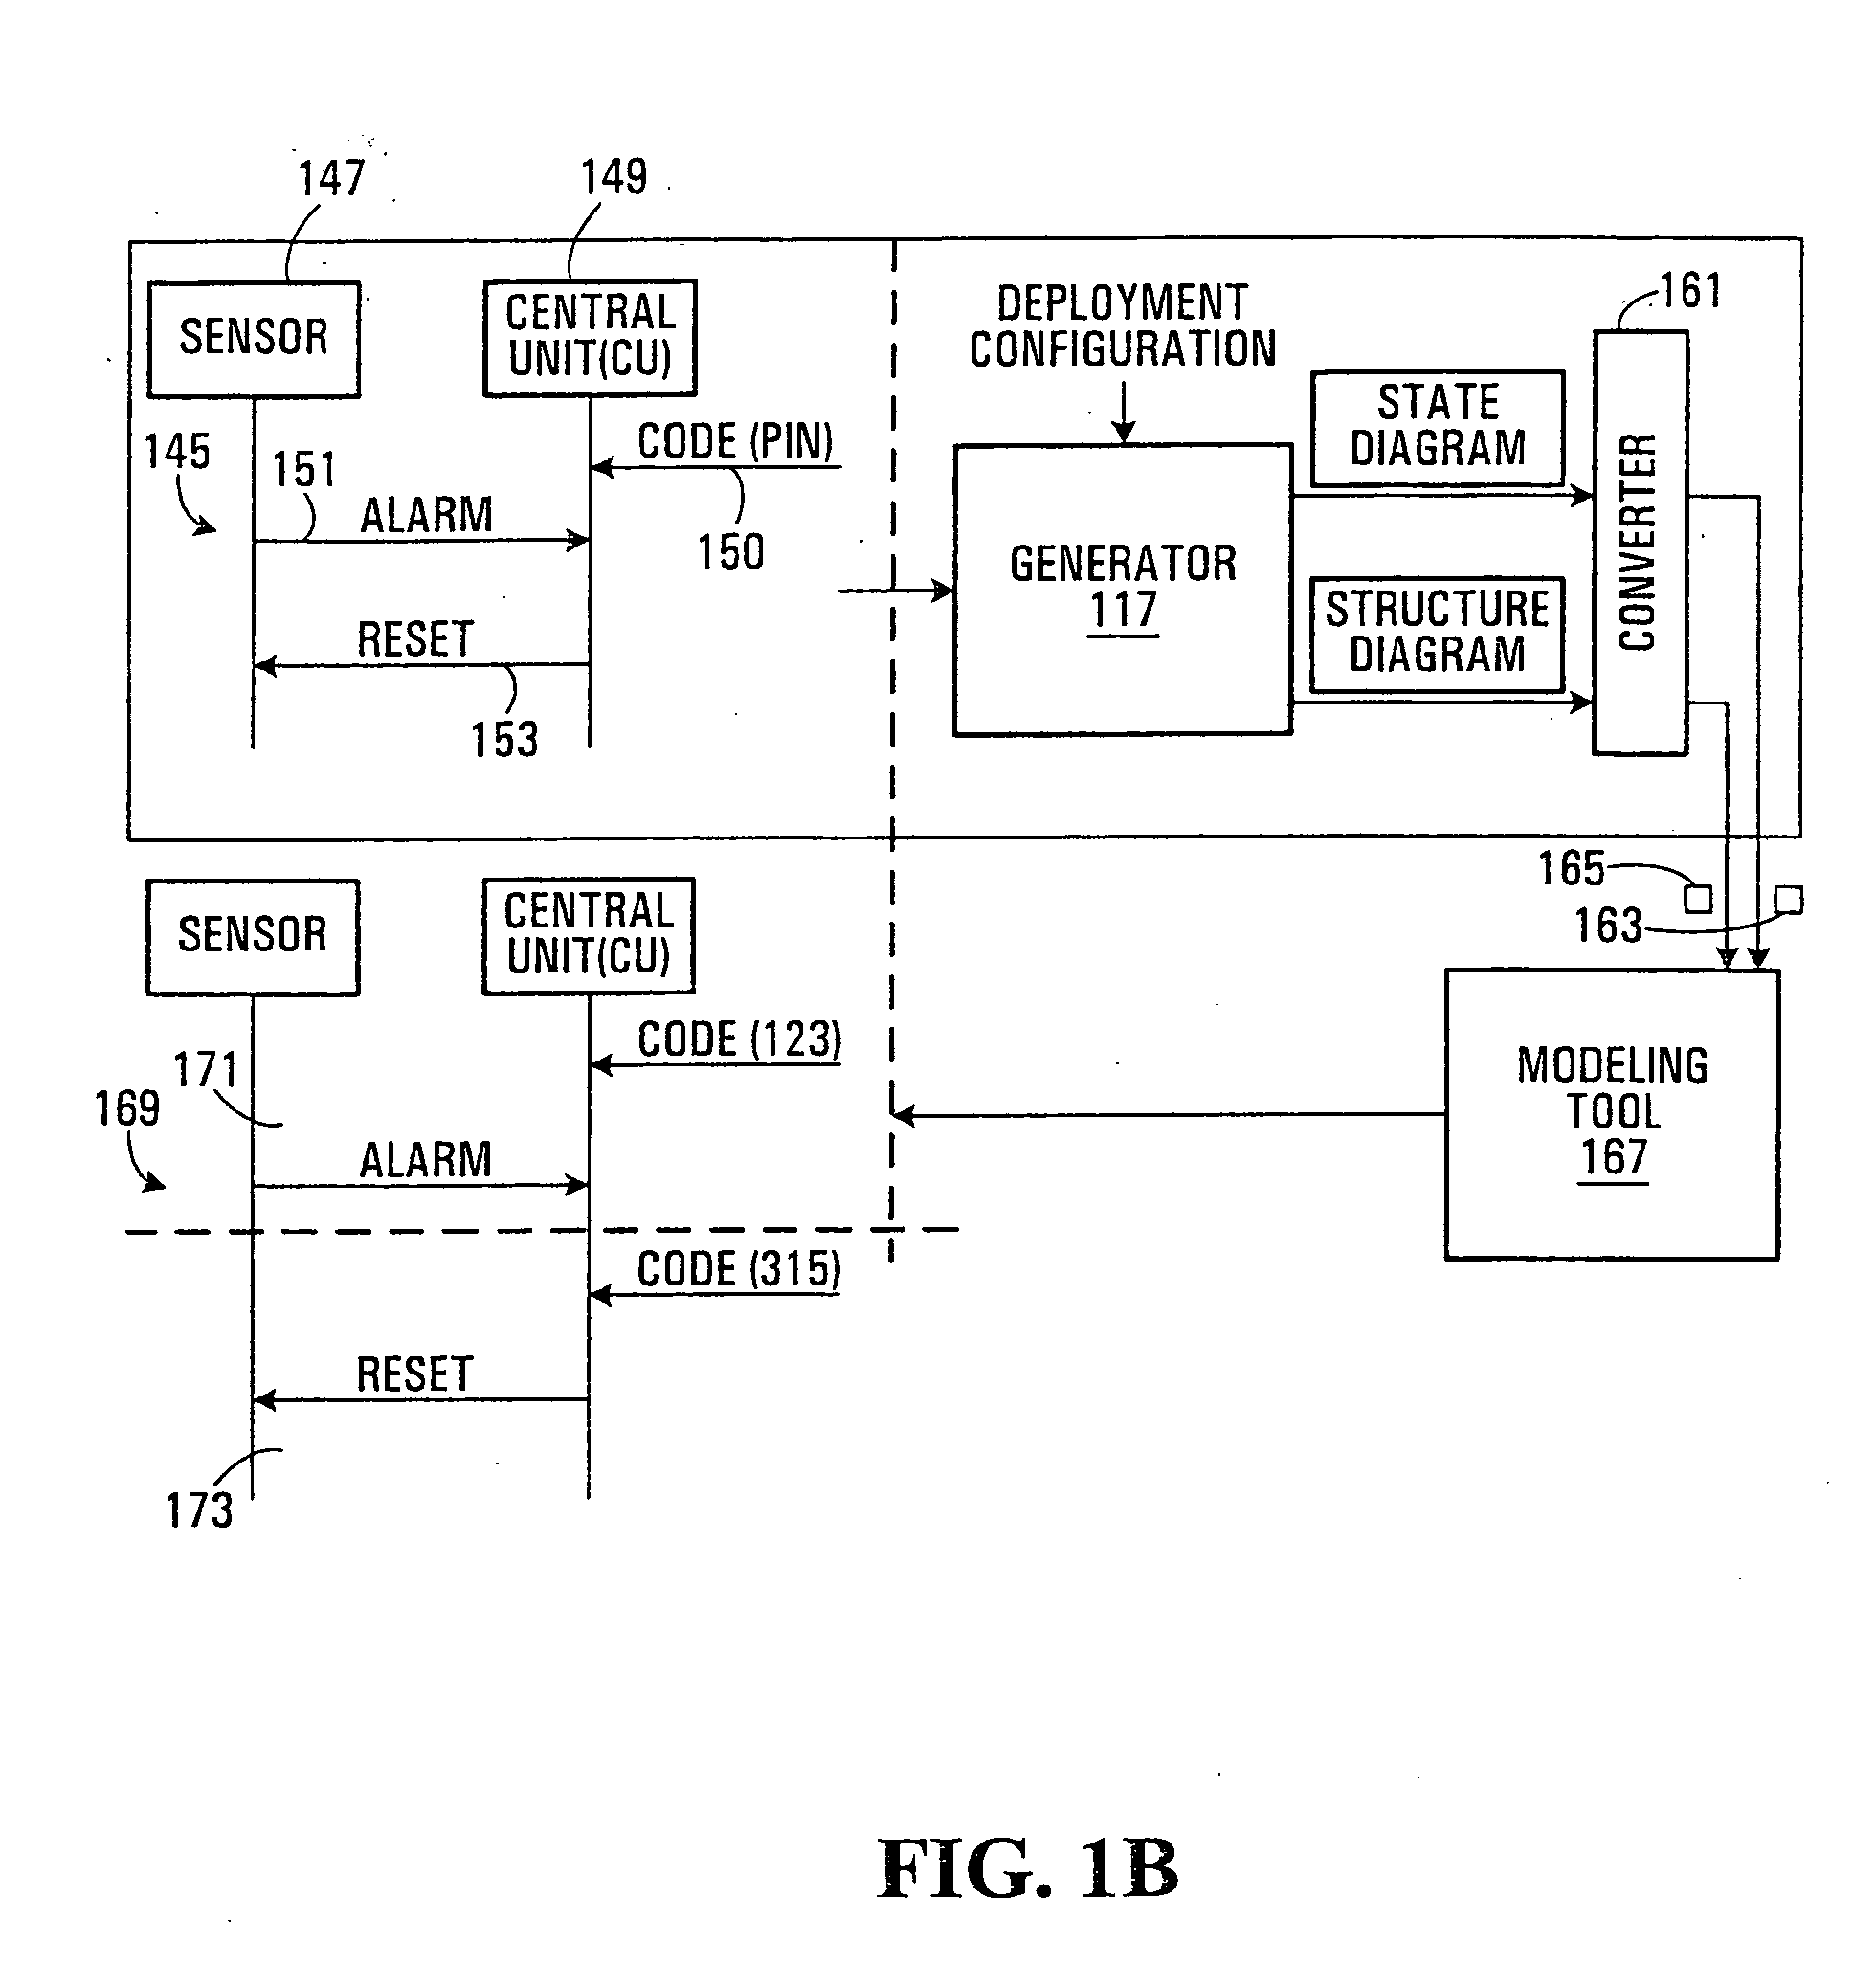 Methods, apparatus and programs for system development